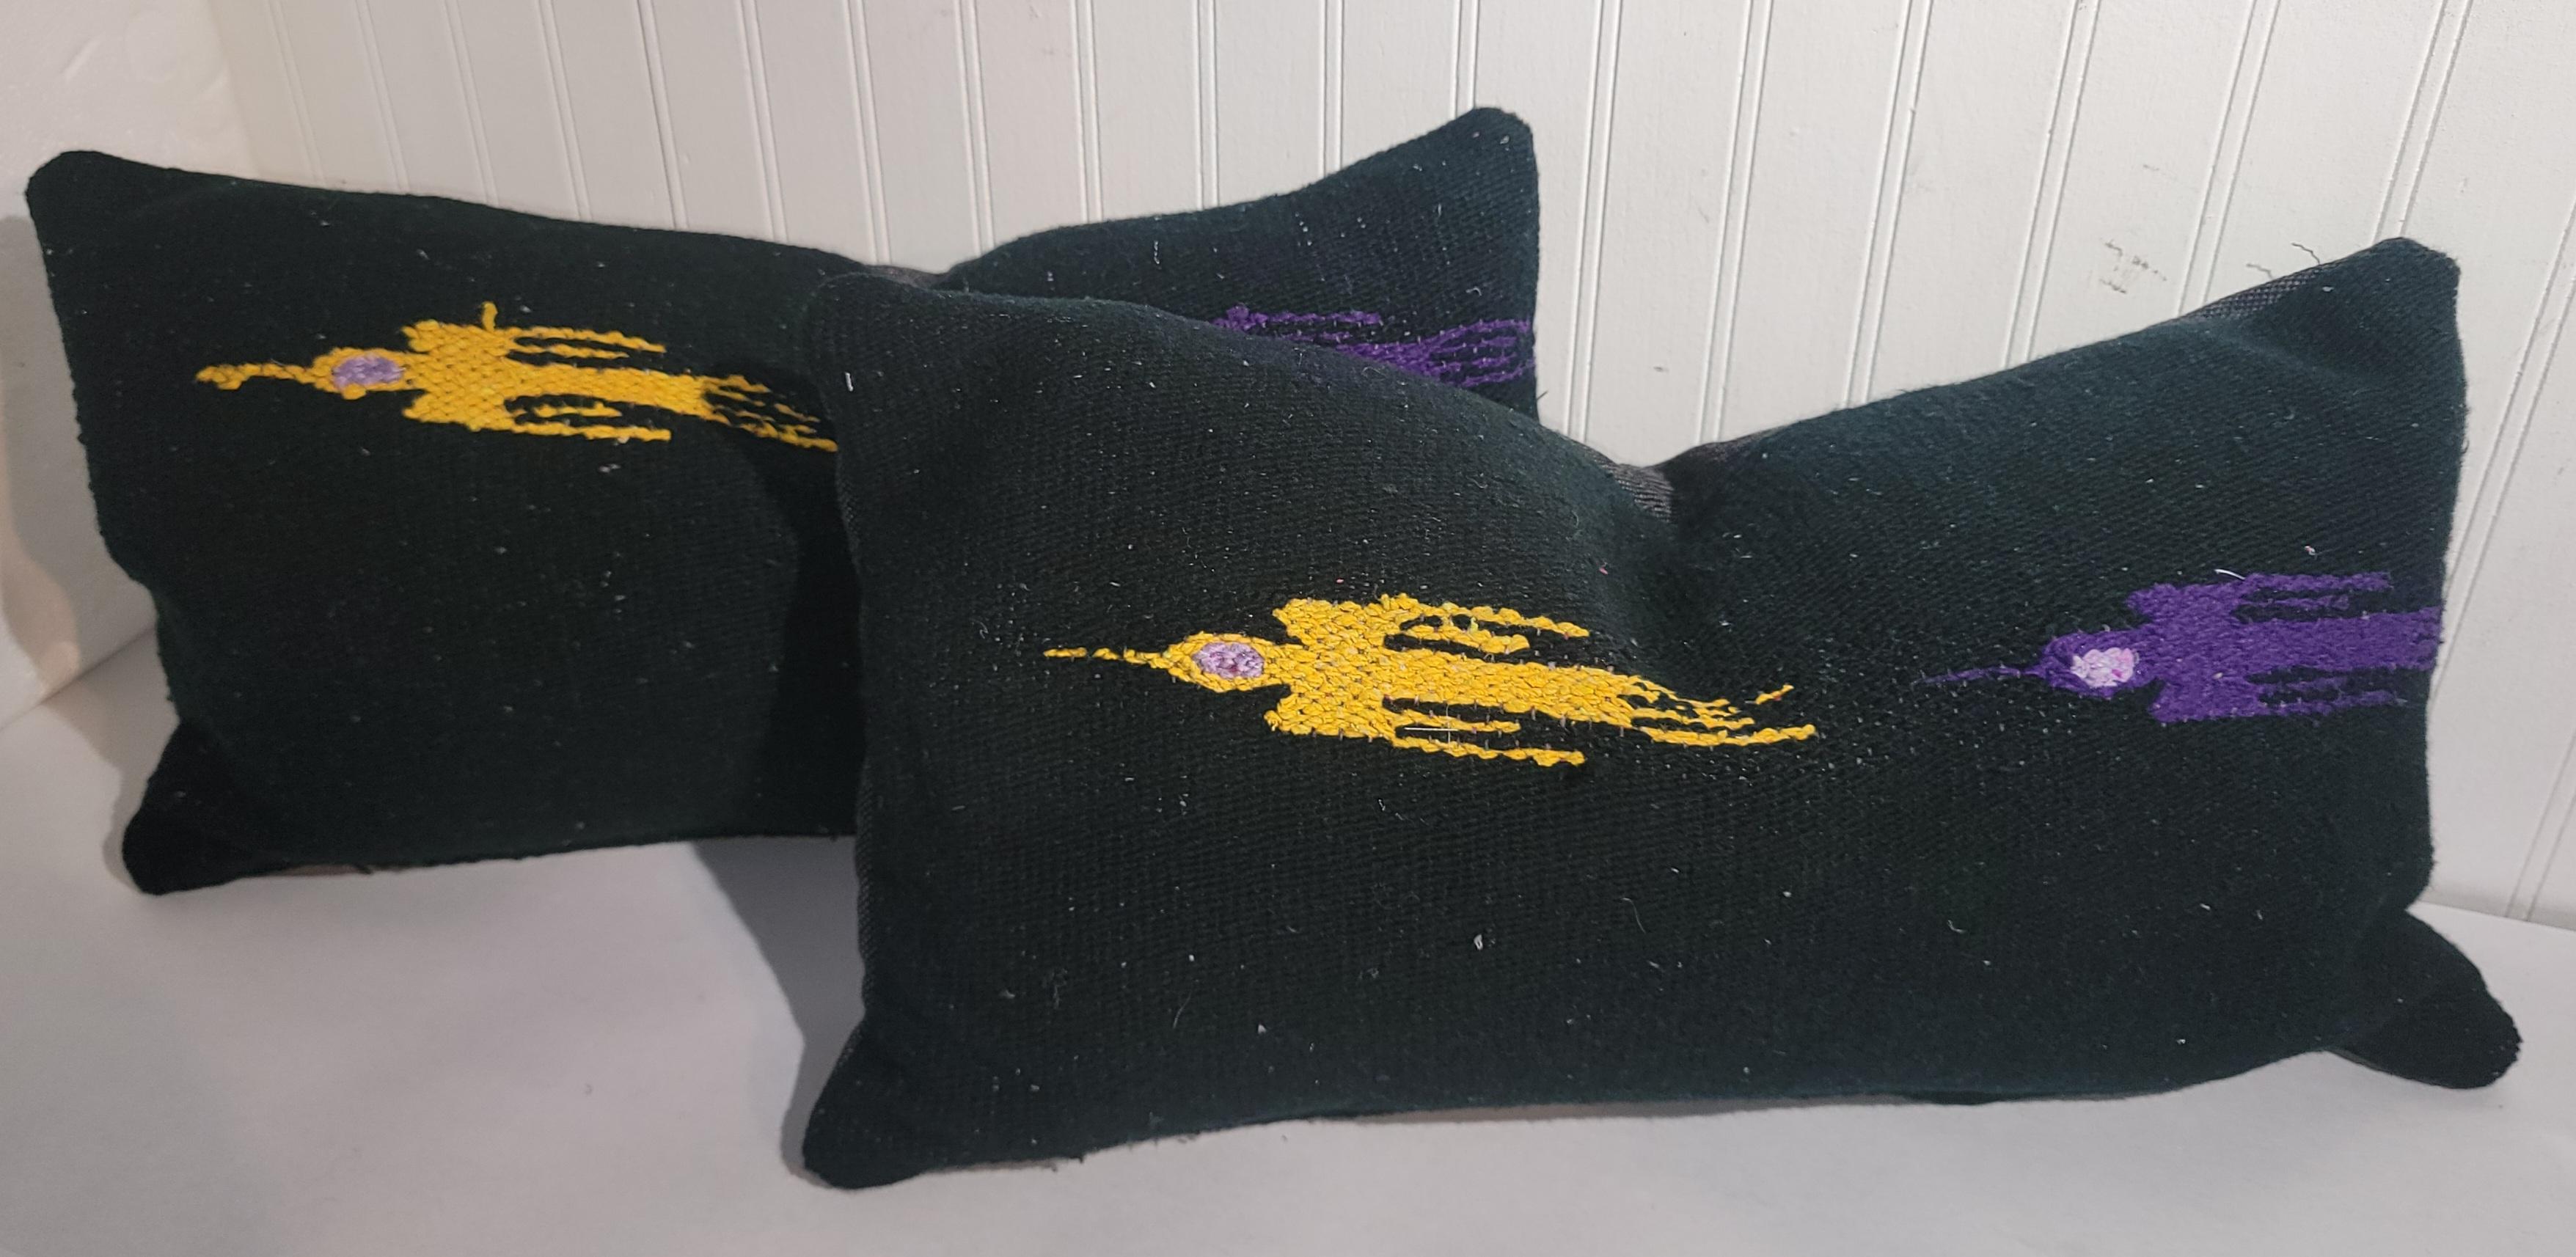 Collection of four bird pillows. Bird depict that of birds in flight. The birds are yellow, purple, red and turquoise. The pillows are a thicker wool Mexican weave that was made into pillows. This is sold in a set of four. 

Please ask is any